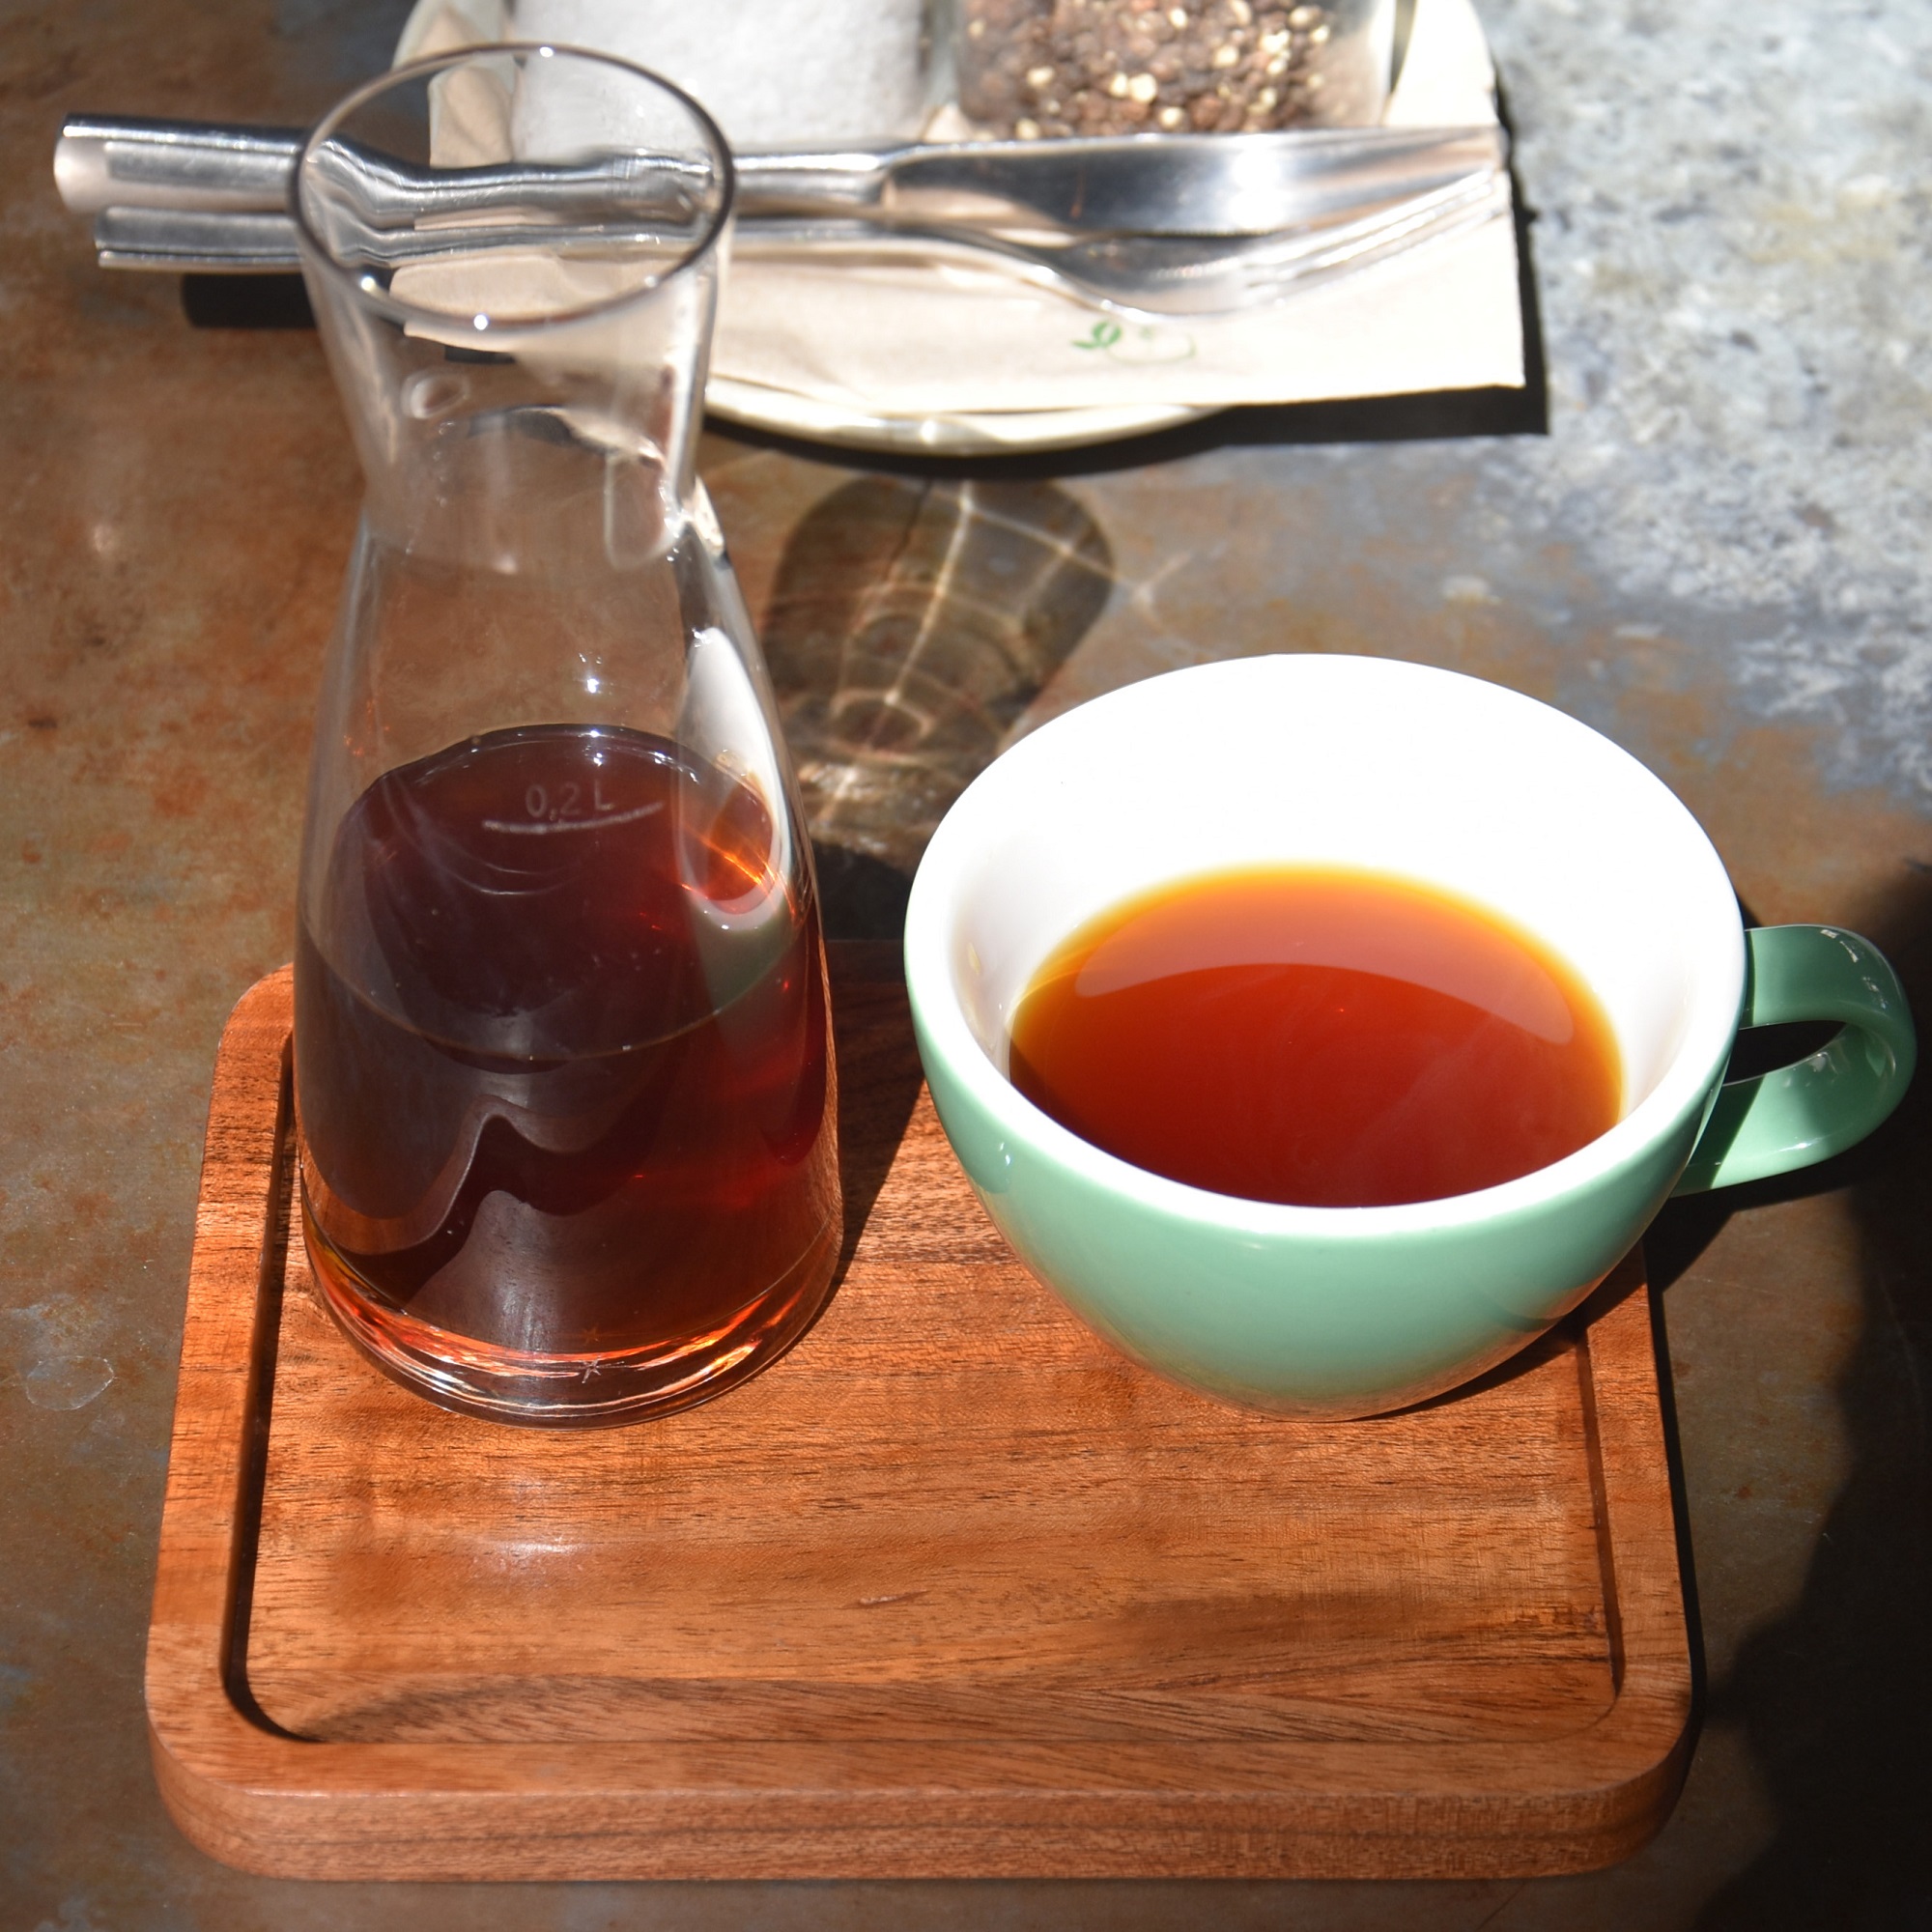 A beautiful carafe of a V60 of the Papua New Guinea (PNG) Grassroots, a fine, rich, fruity, full bodied naturally-processed coffee, roasted and served by KaffeeKirsche Café & Bakery on a wooden tray with a cup on the side.